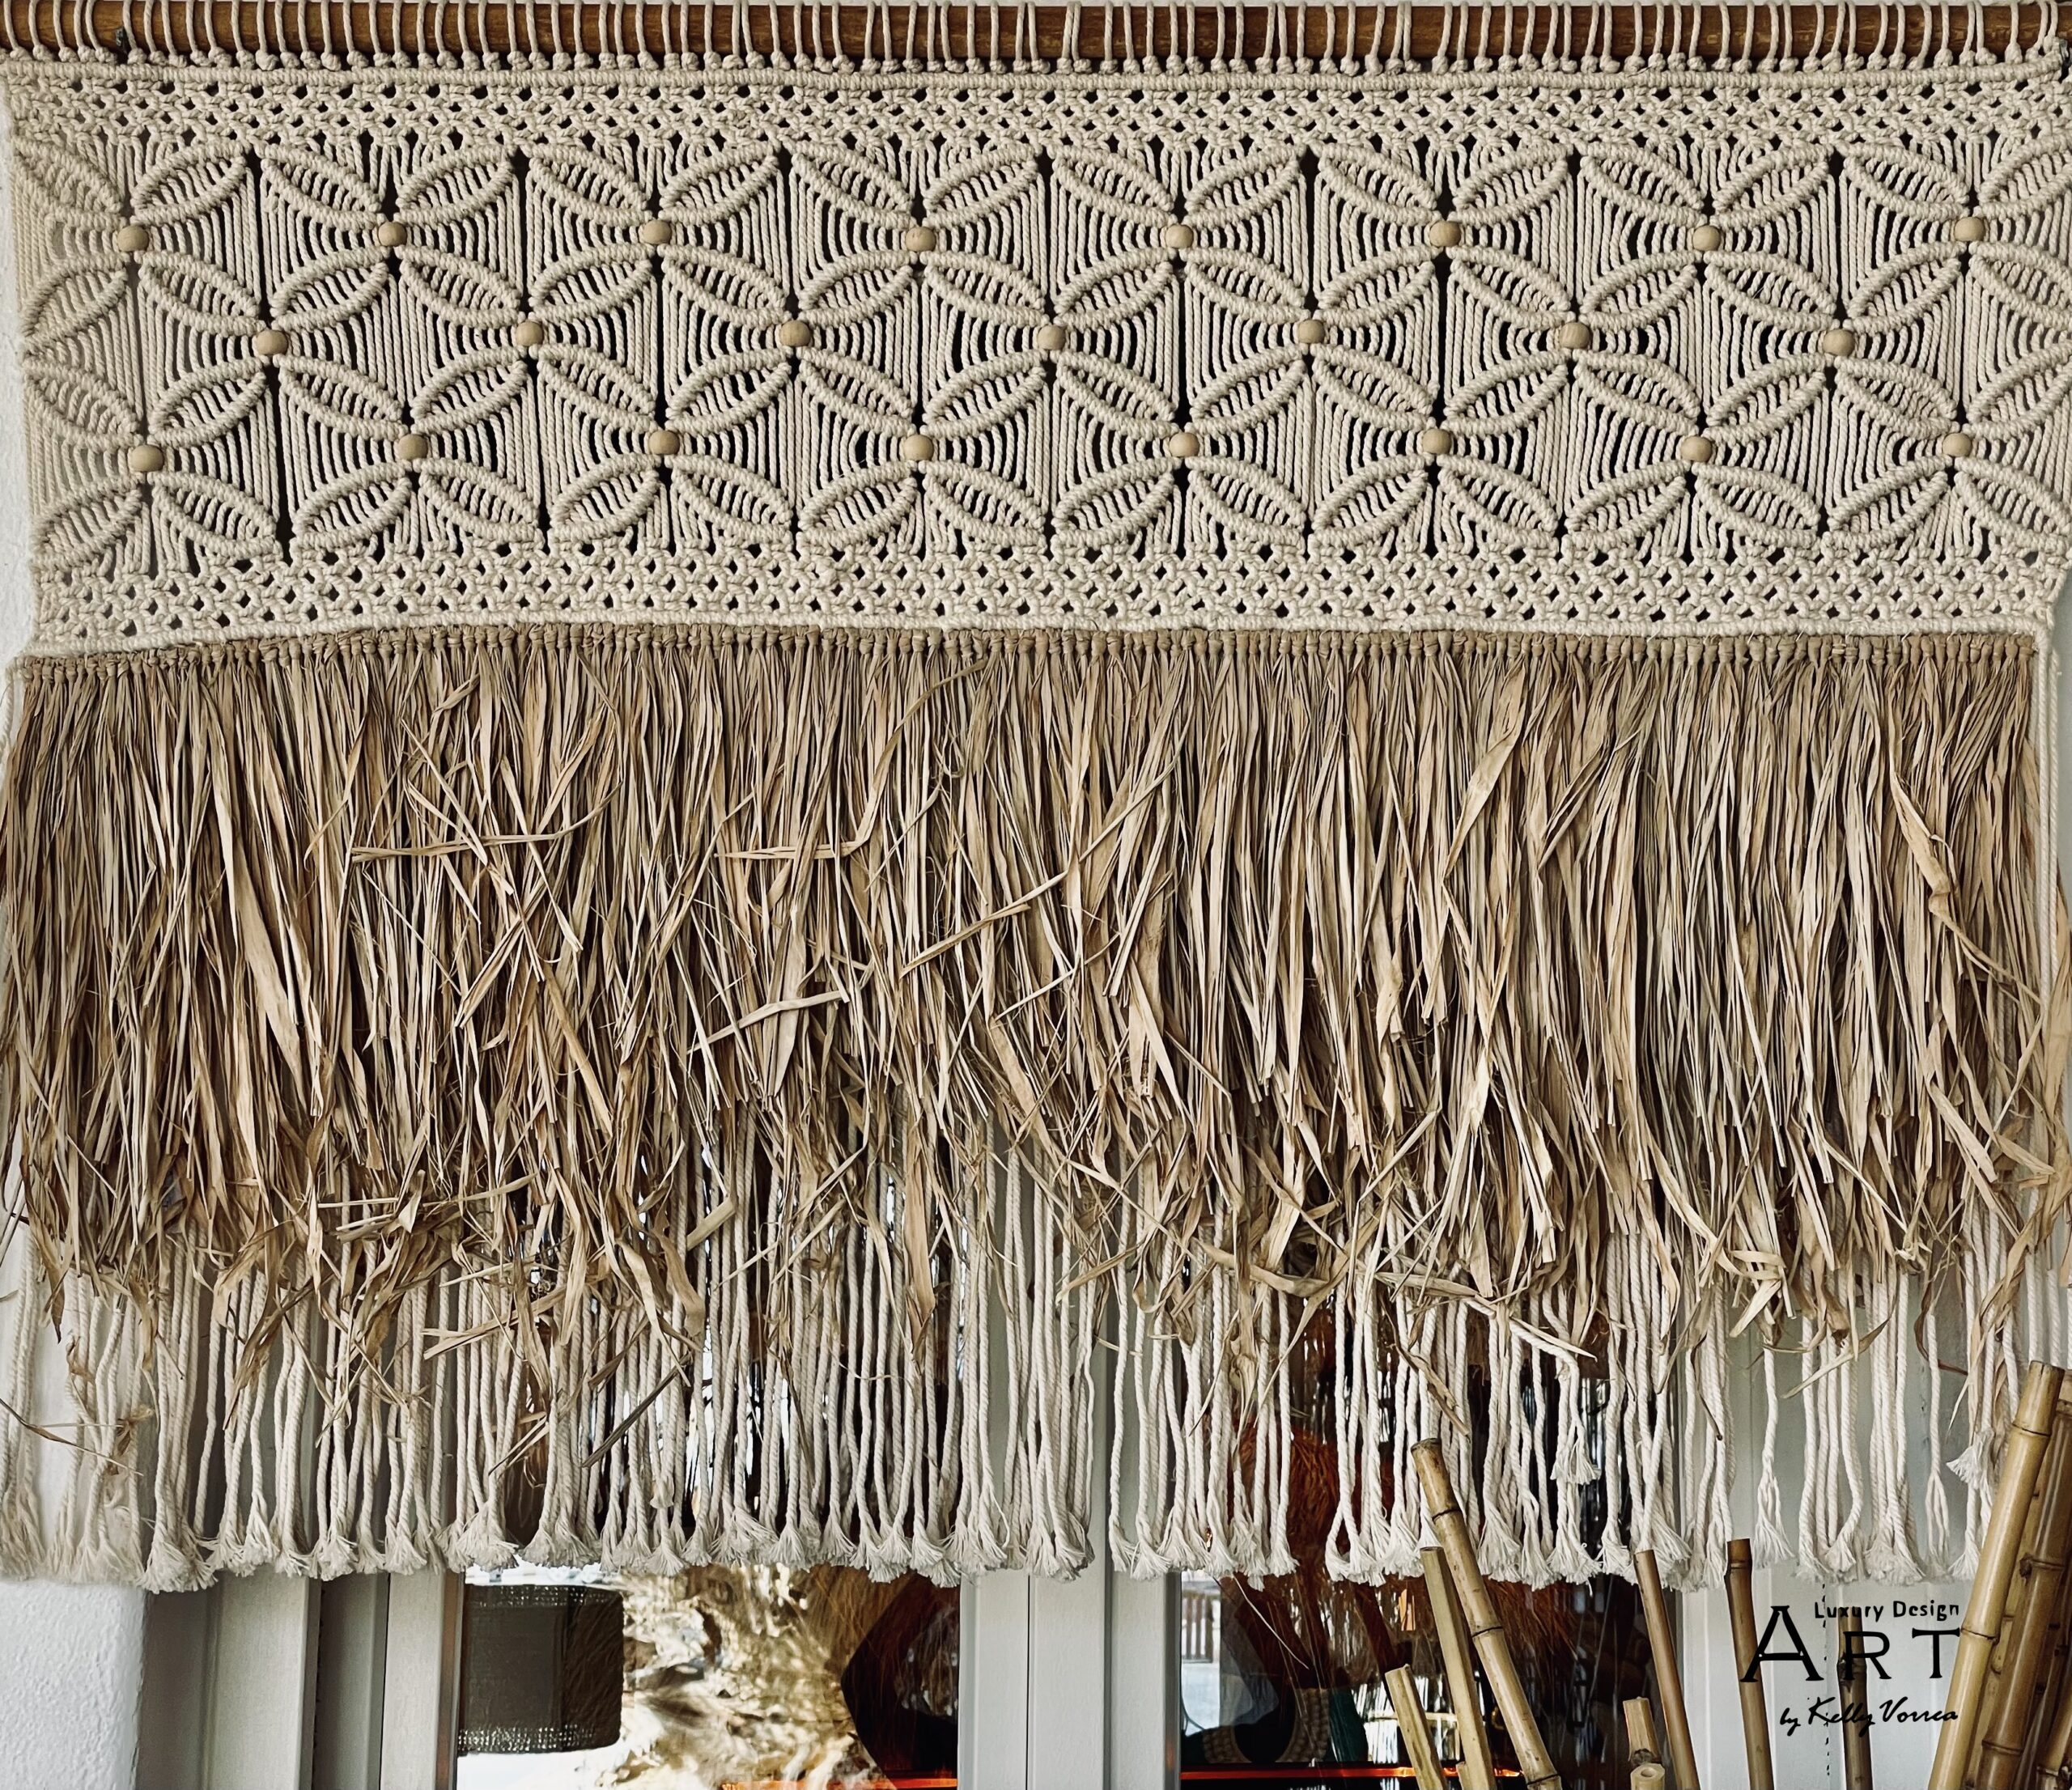 Macrame and cotton ropes workshop in chora Mykonos by Kelly Vorrea